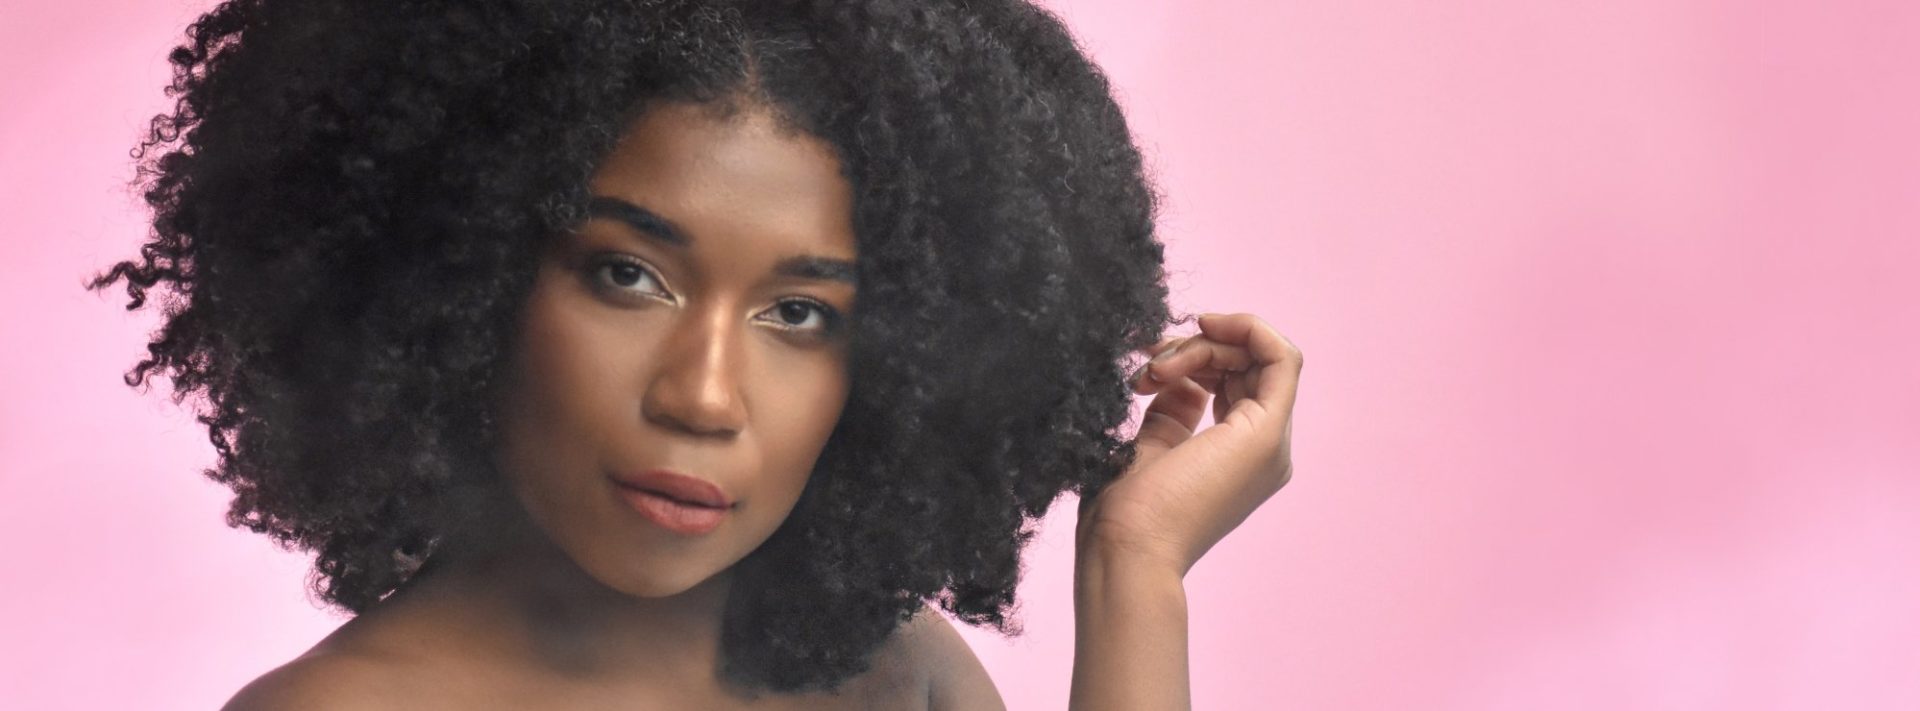 Famous Hair Vlogger Napturals85 Launches A Hair Care Line And We're Beyond Excited